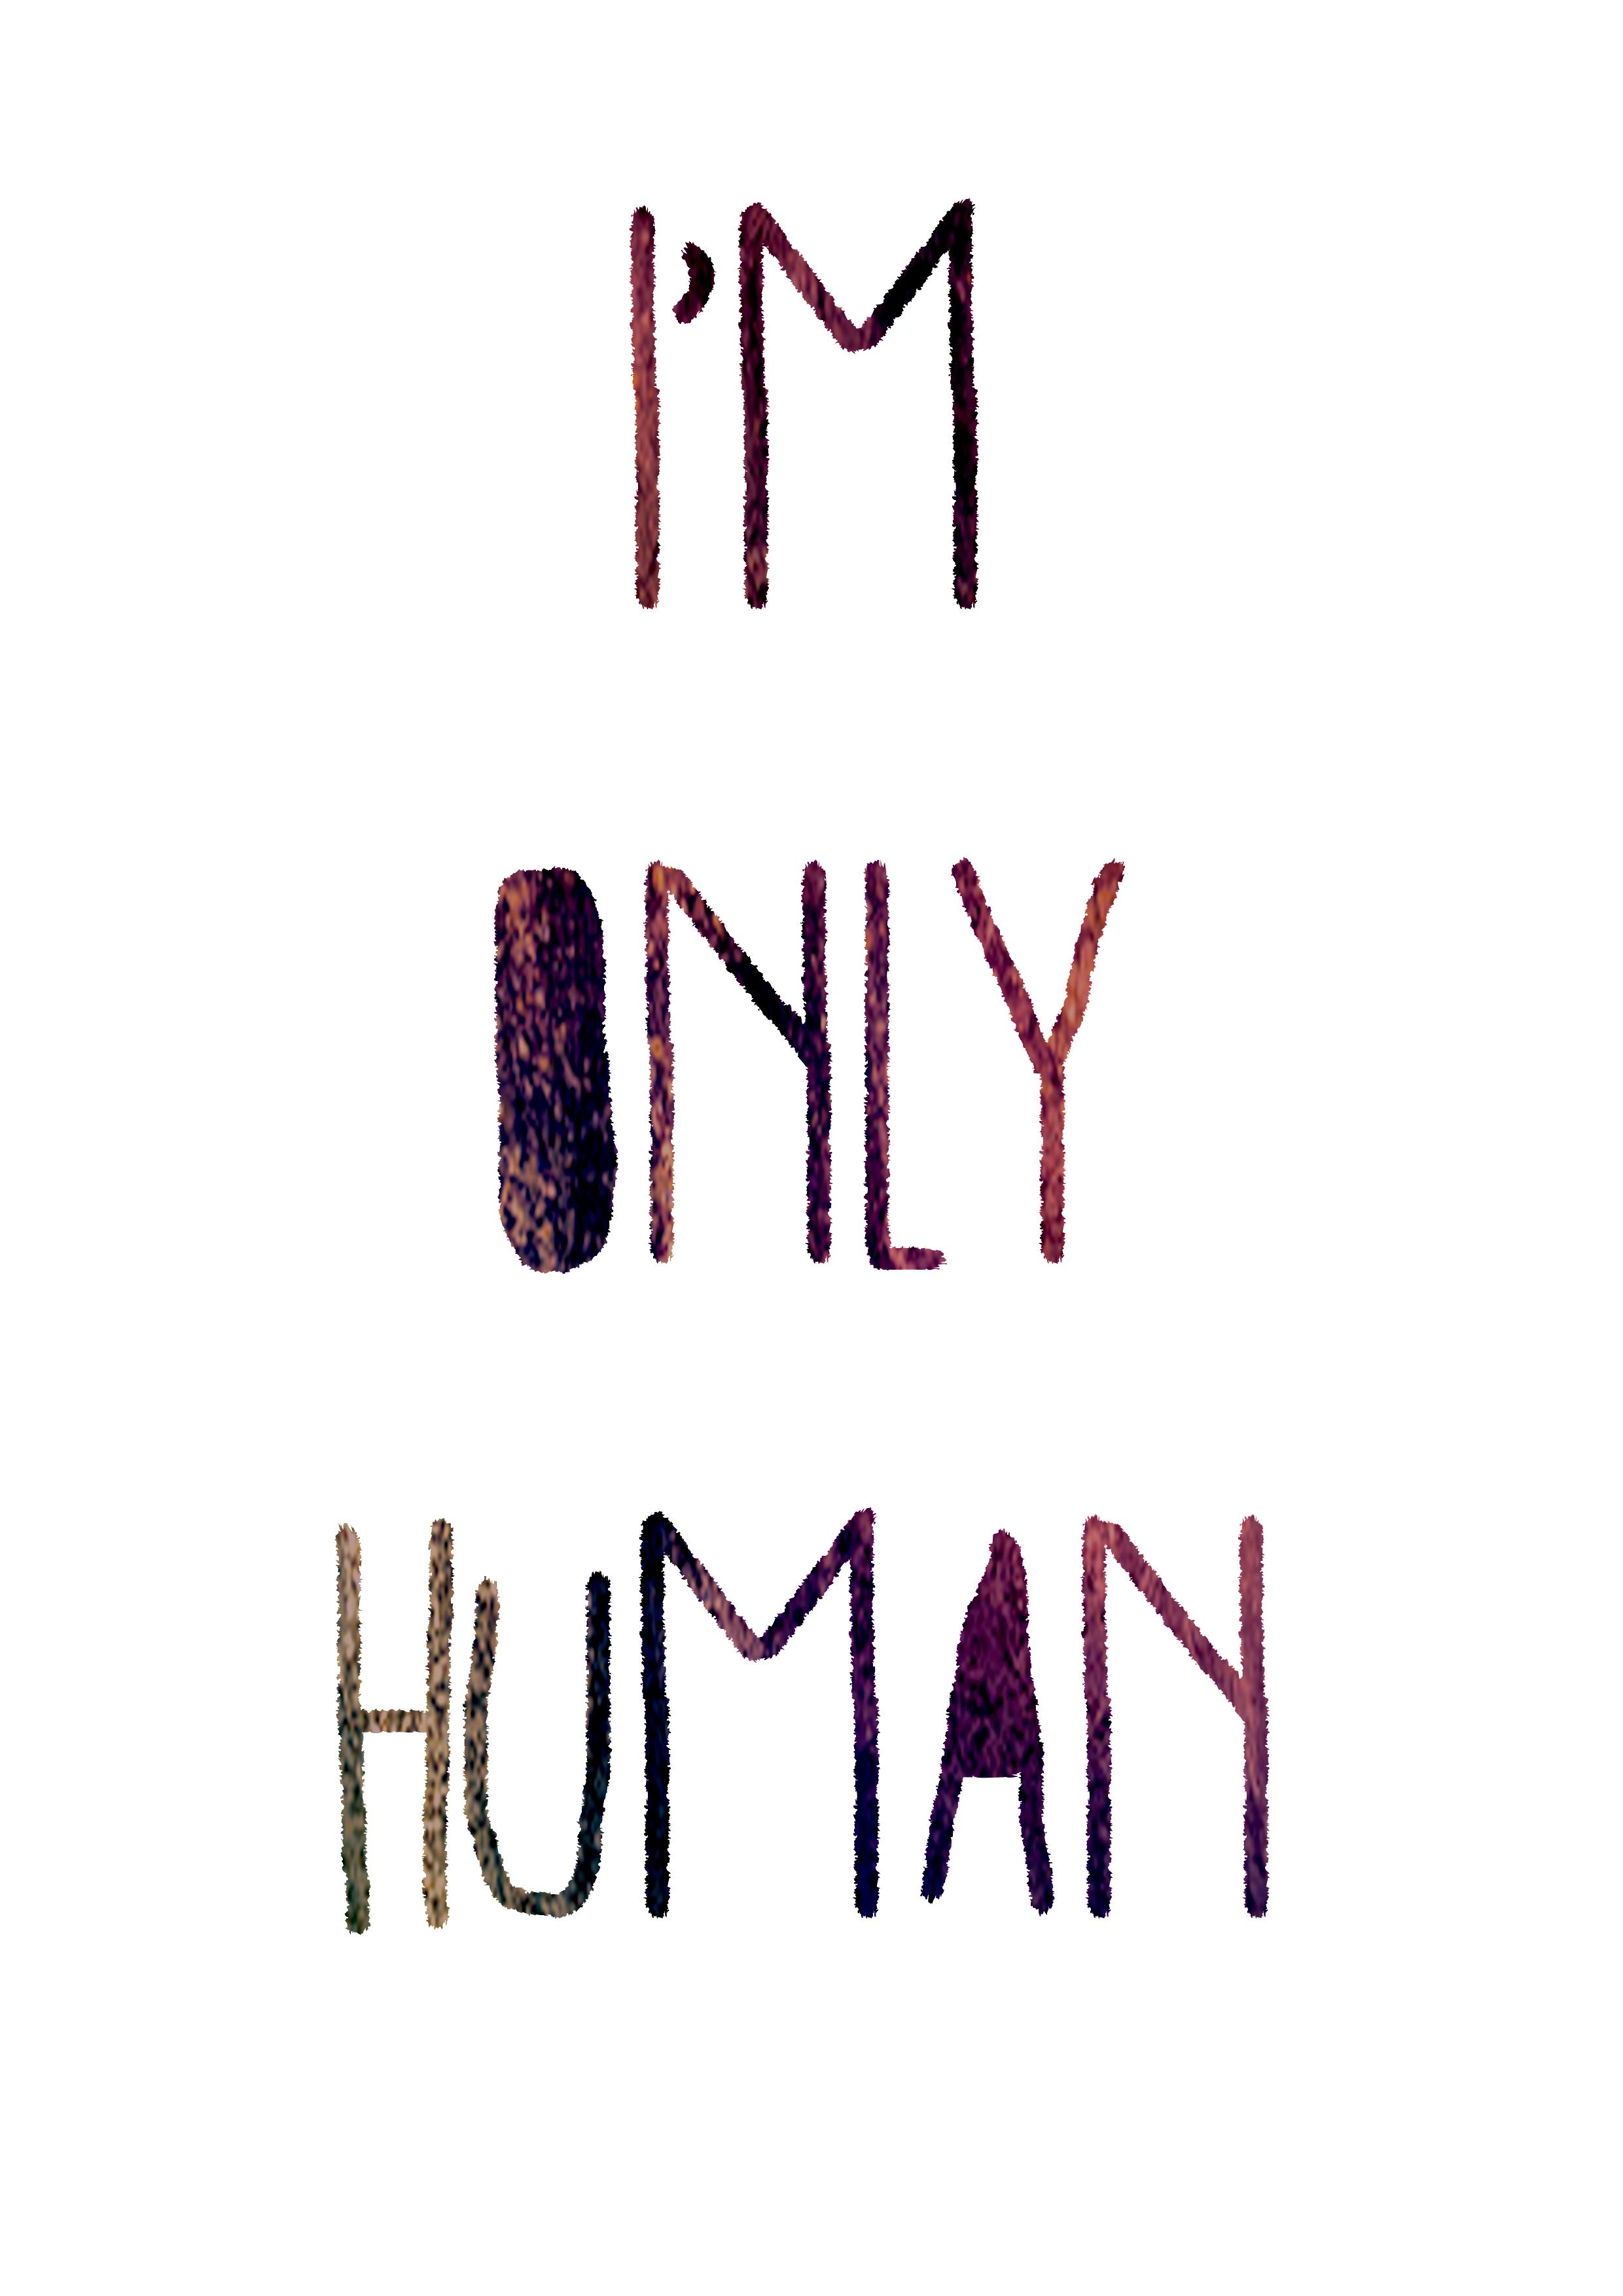 I m only your. Im only Human. Im only Human Мем. Im only Human after all. I am only Human картинка.